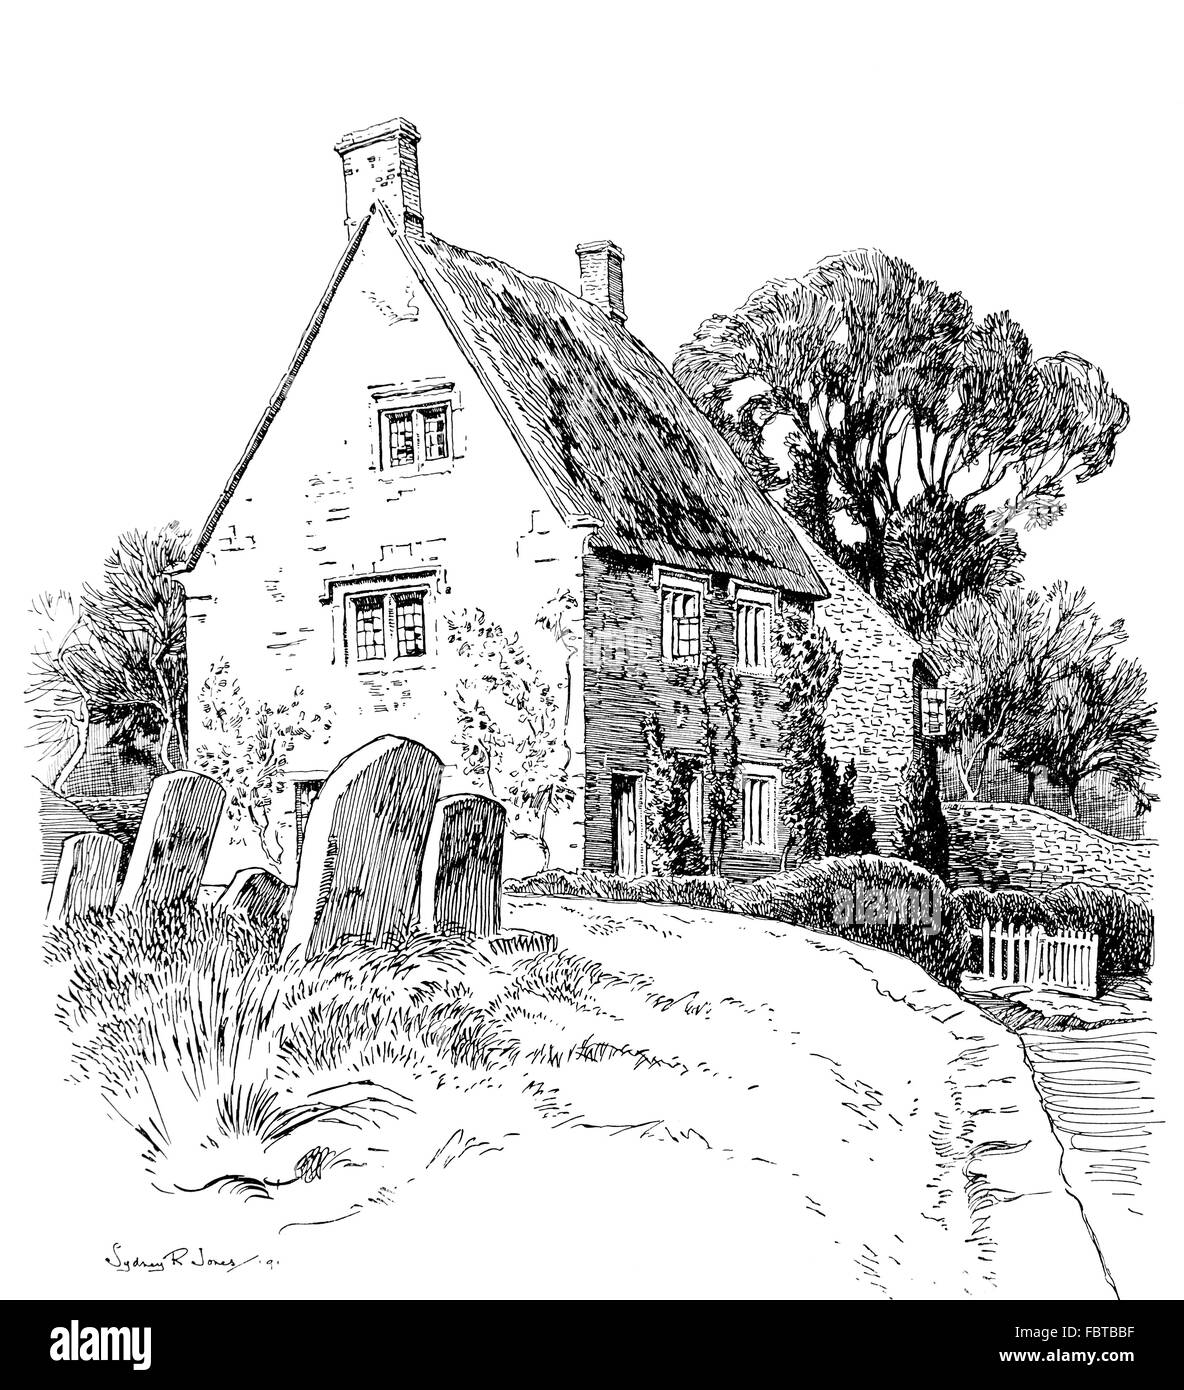 UK, England, Oxfordshire, Claydon, Main Street, thatched cottages beside churchyard in 1911, line illustration Stock Photo